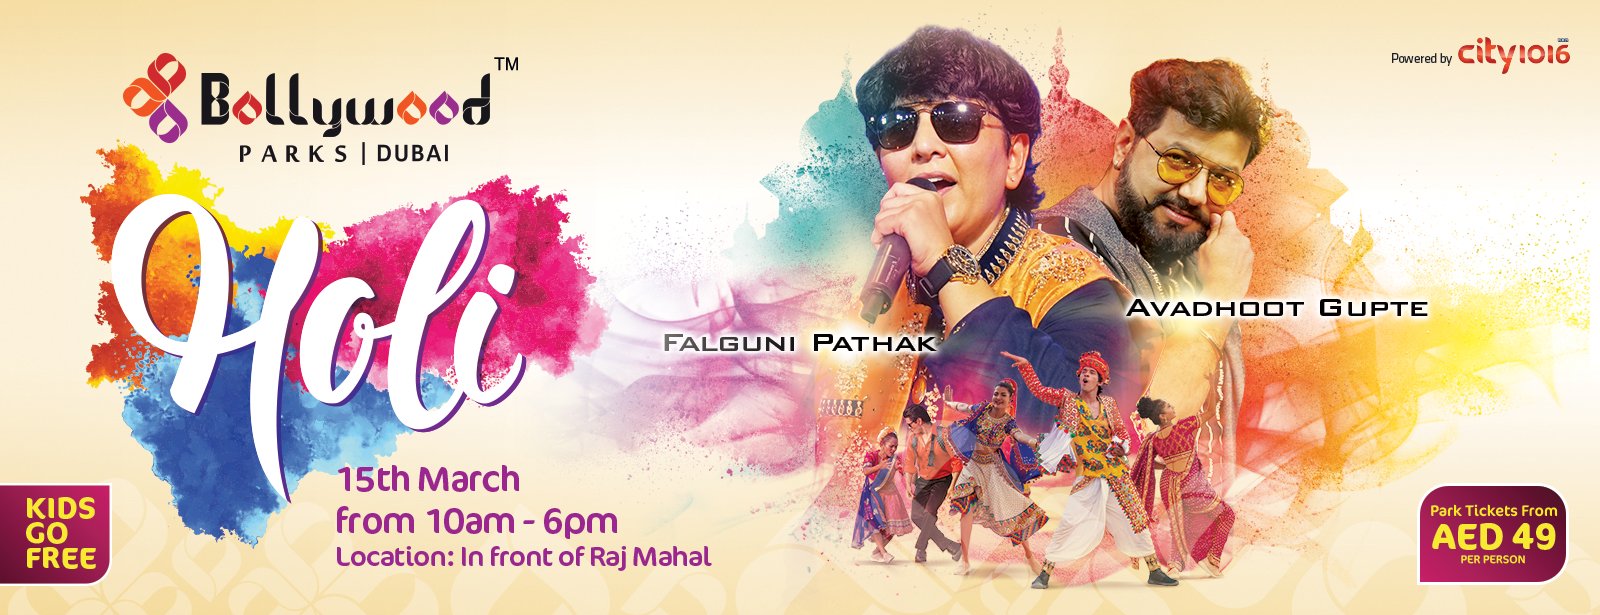 Holi with Falguni Pathak and Avadhoot Gupte at Bollywood Parks - Coming Soon in UAE